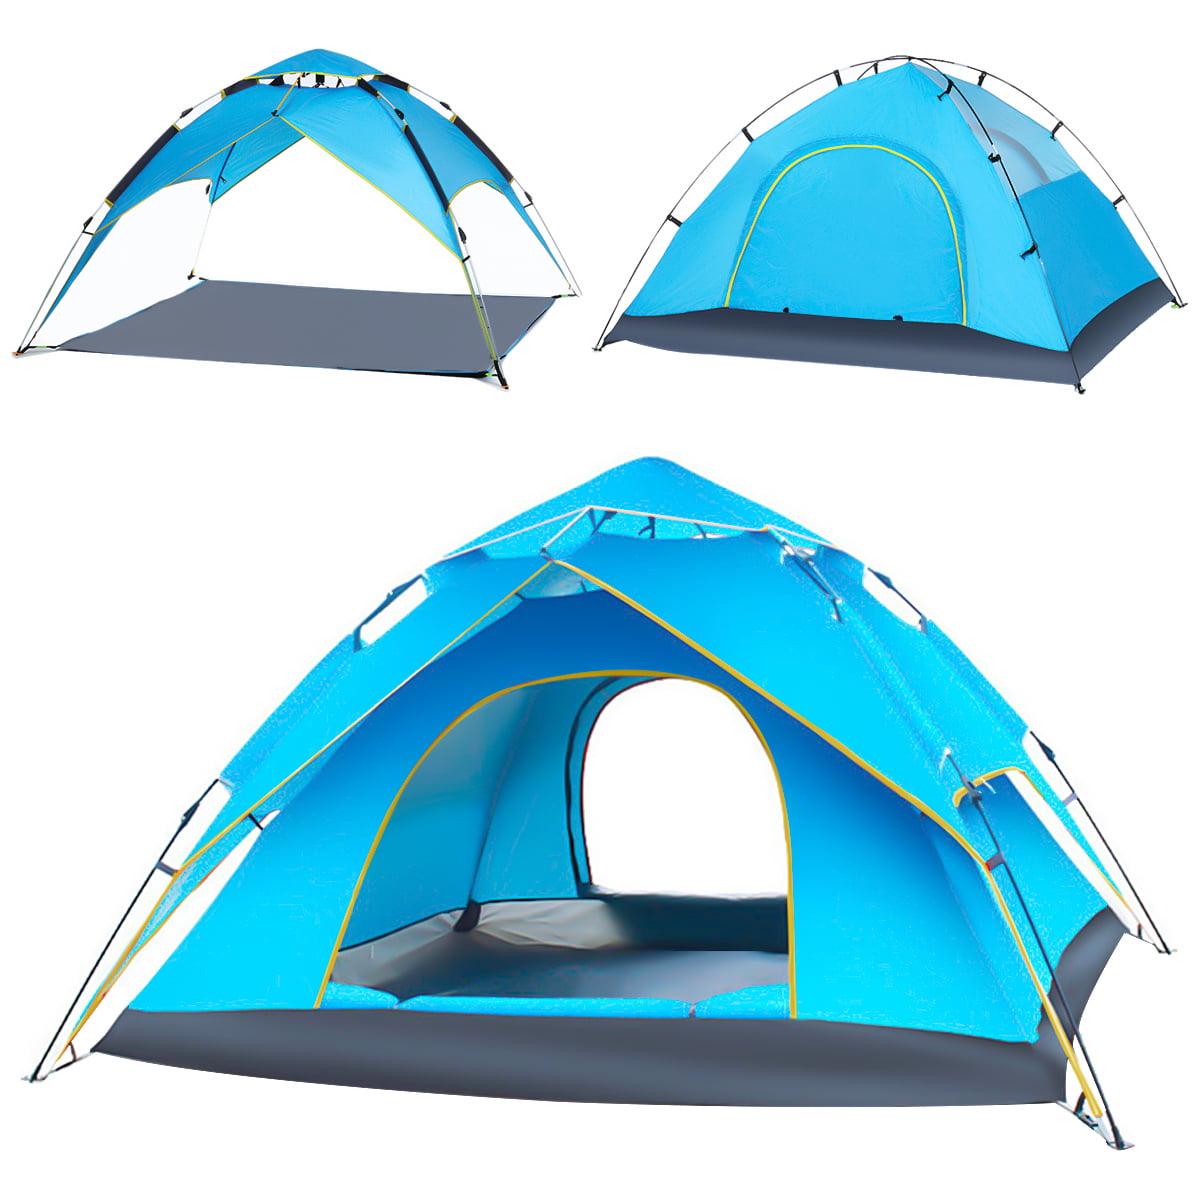 4 Season 4 People Waterproof Portable Outdoor Camp Automatic Instant Popup Tent